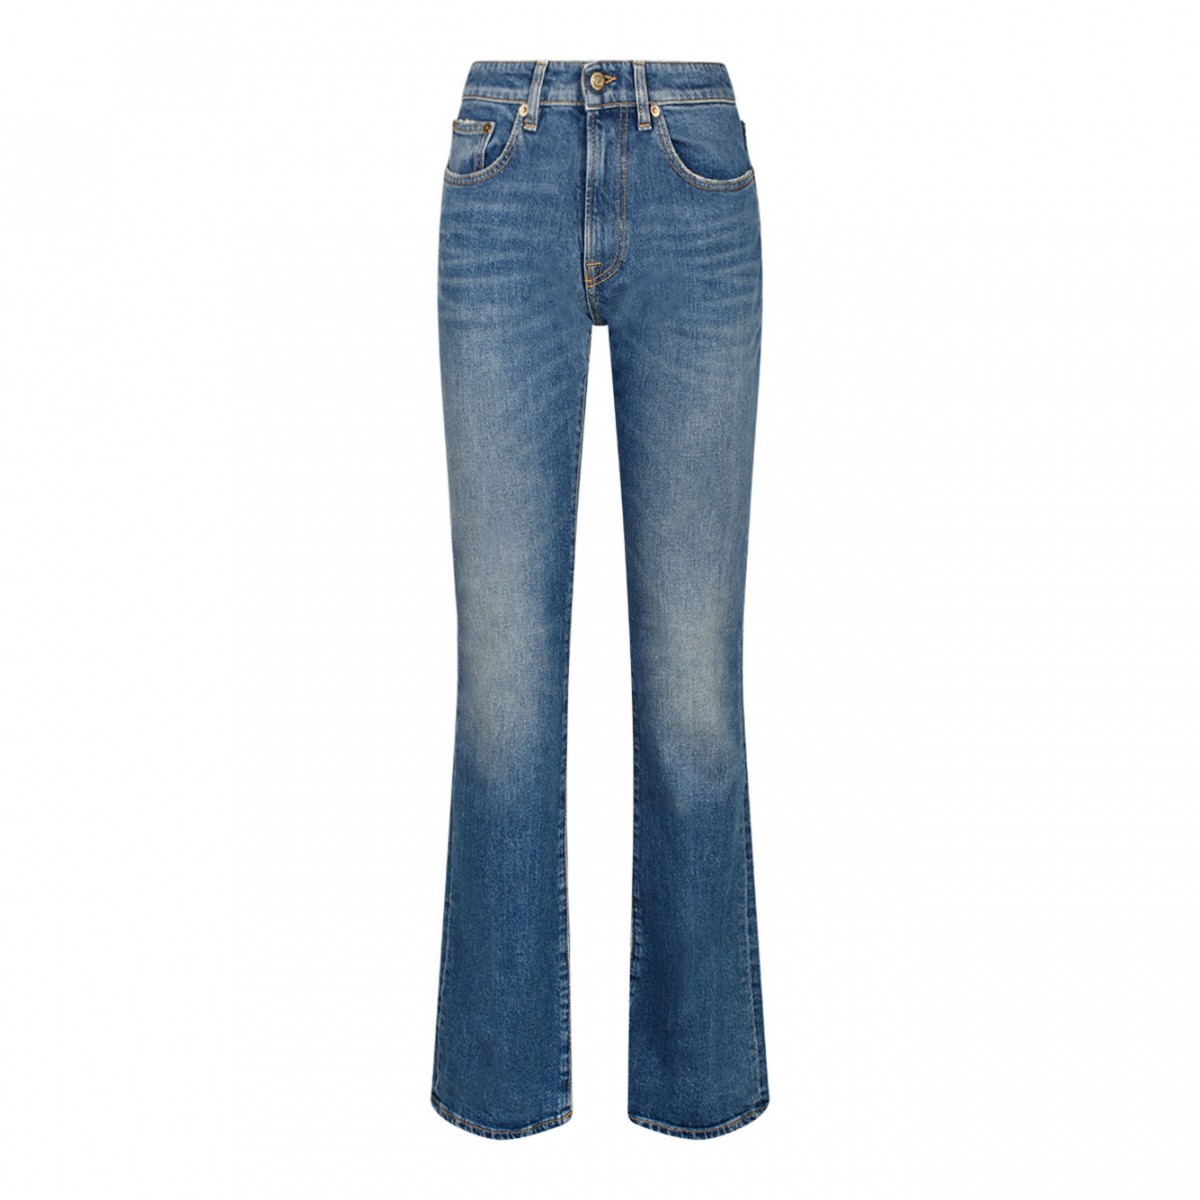 Blue Washed Effect Jeans